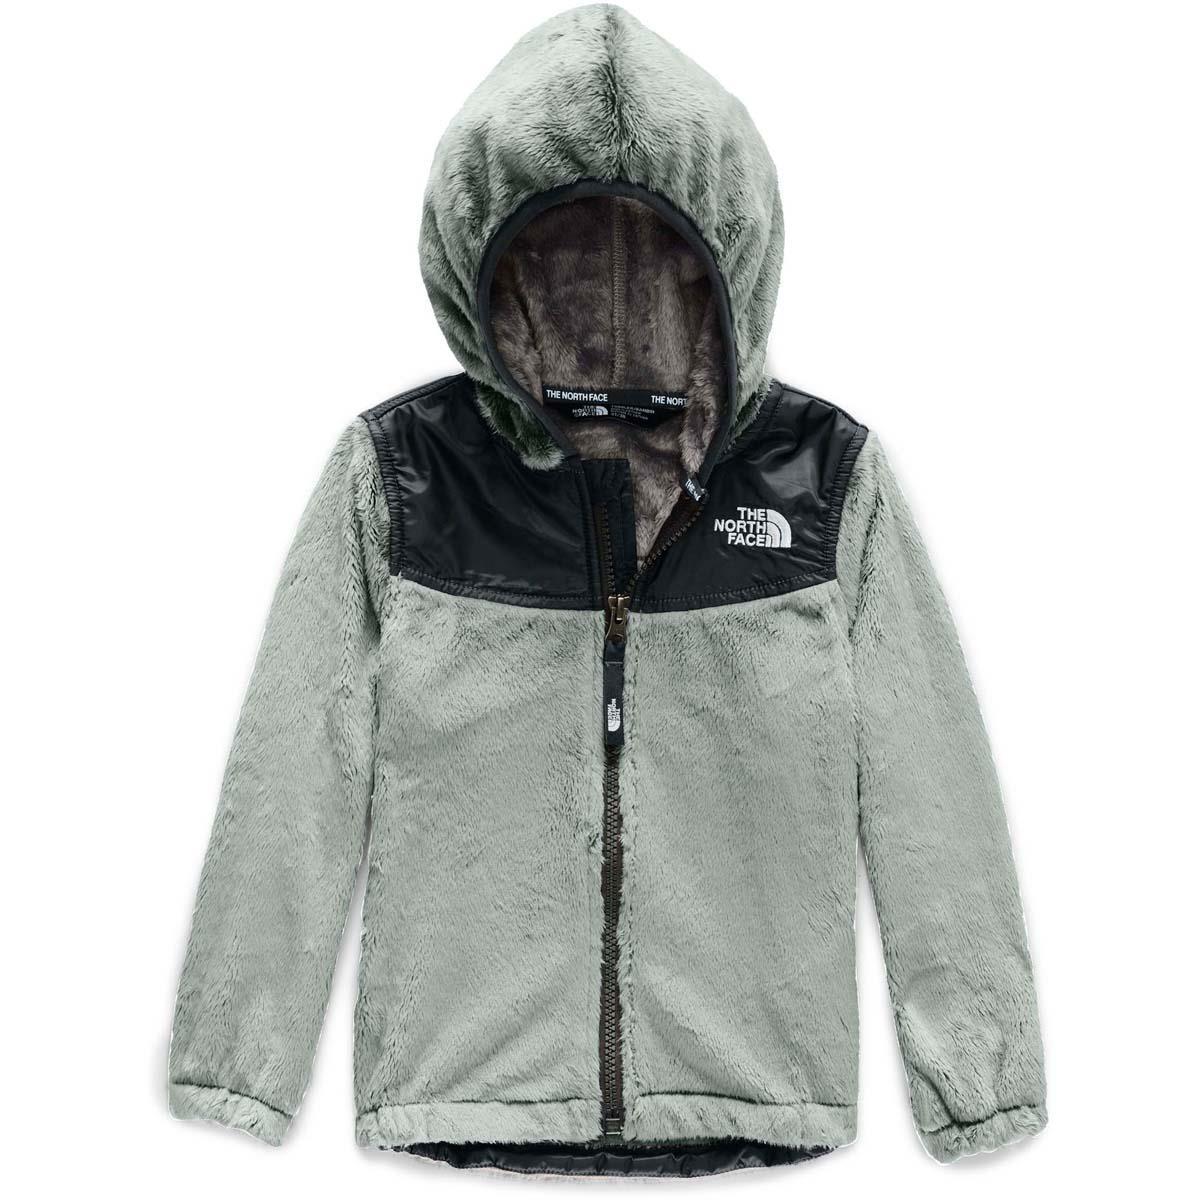 6t north face jacket